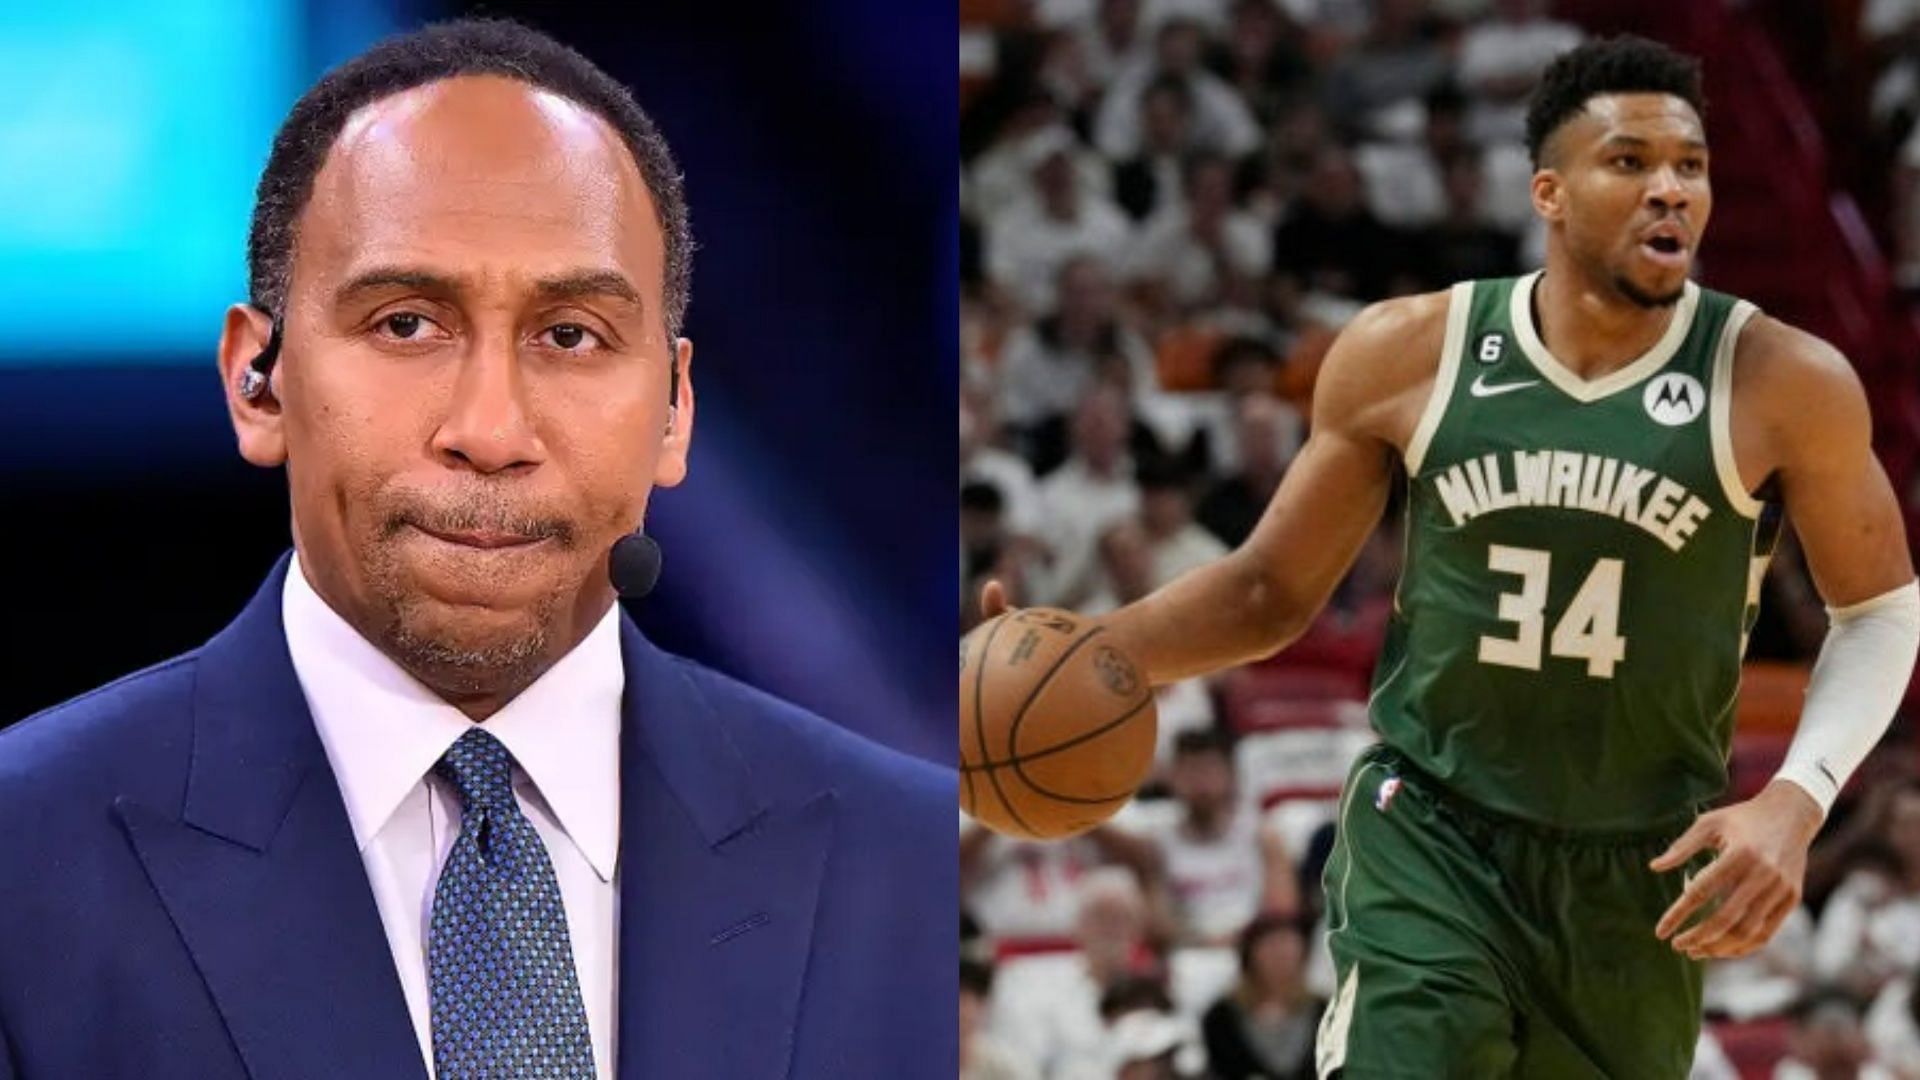 Stephen A. Smith shows excitement over the prospect of Giannis Antetokounmpo joining the New York Knicks